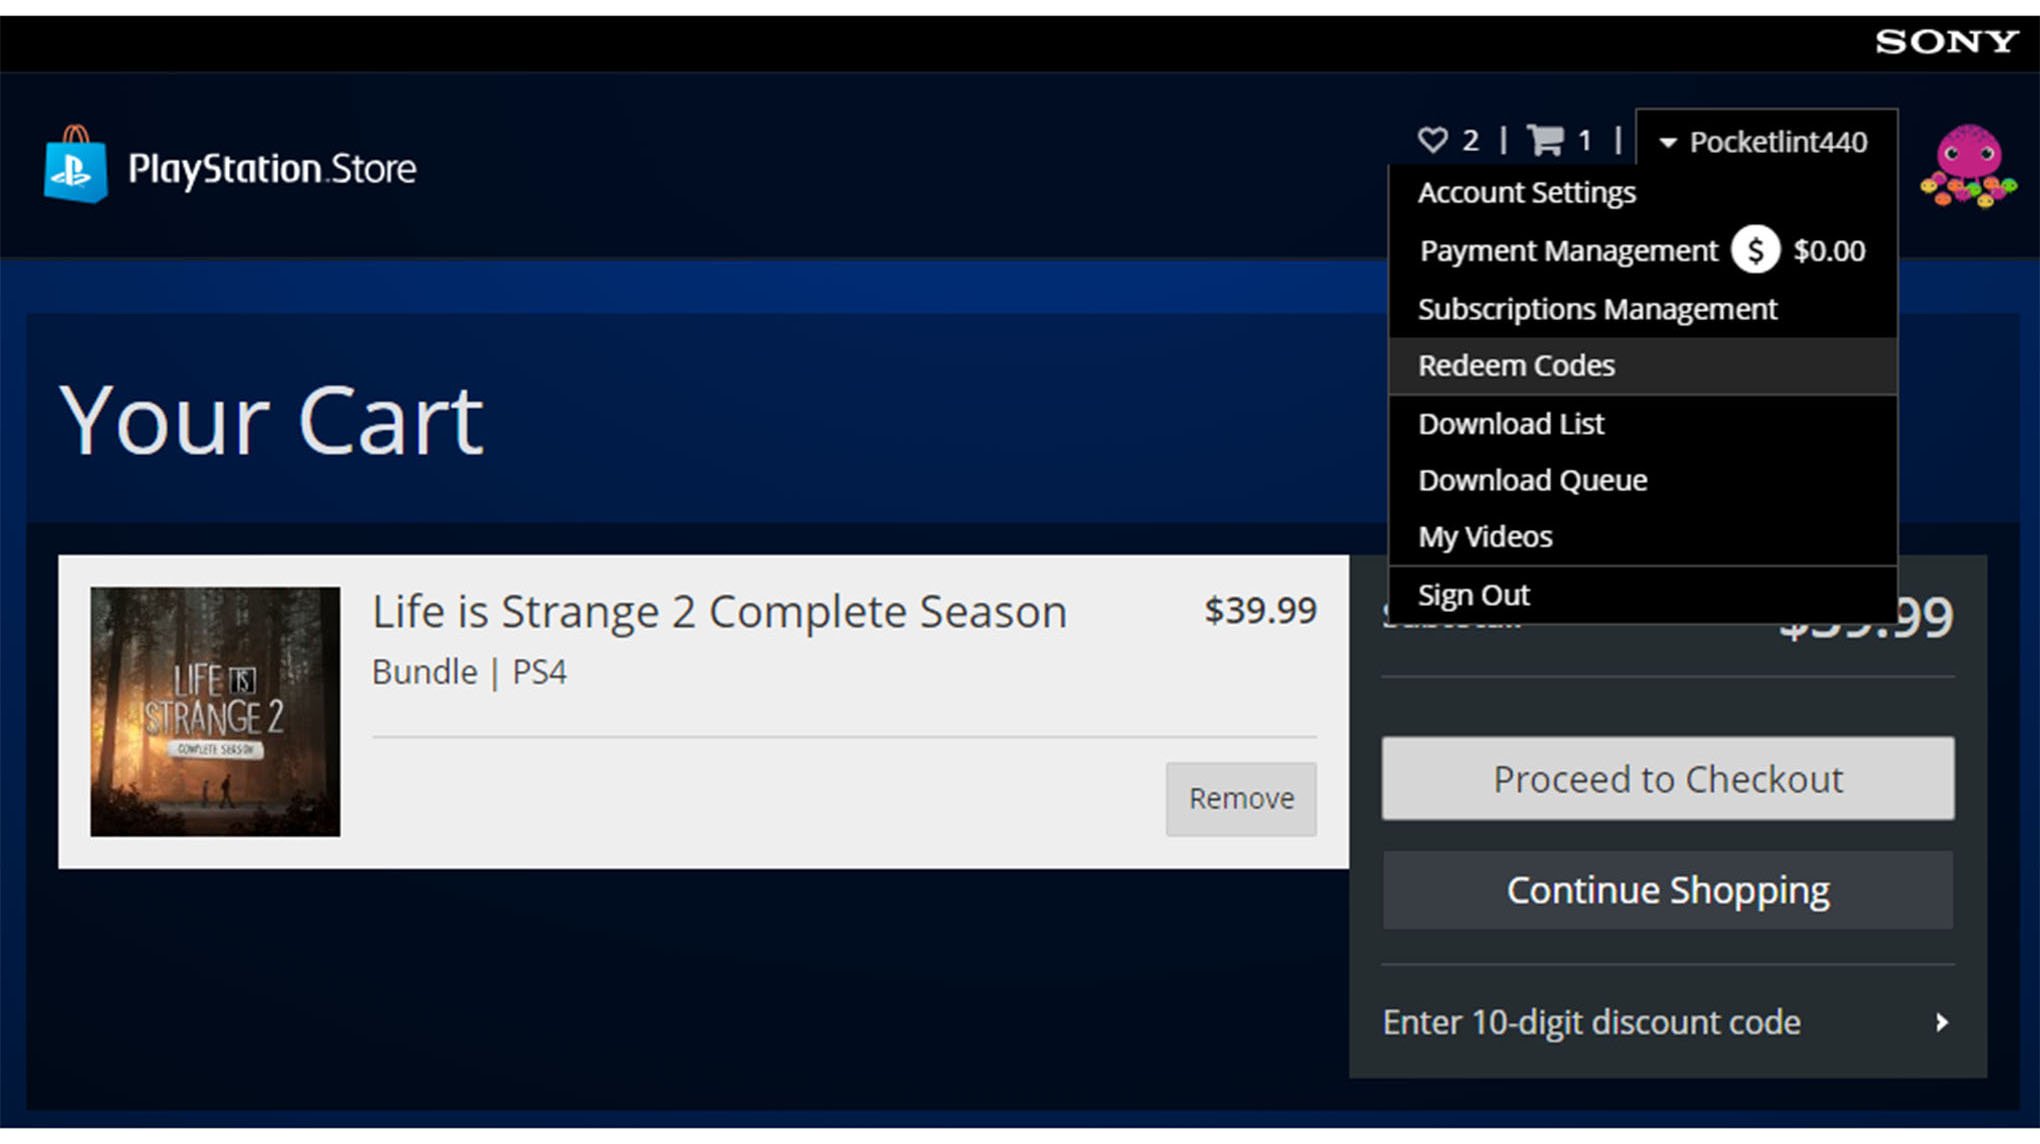 Can You Combine Gift Cards And Credit Cards On Playstation Store Android Central - can you use a playstation card on robux